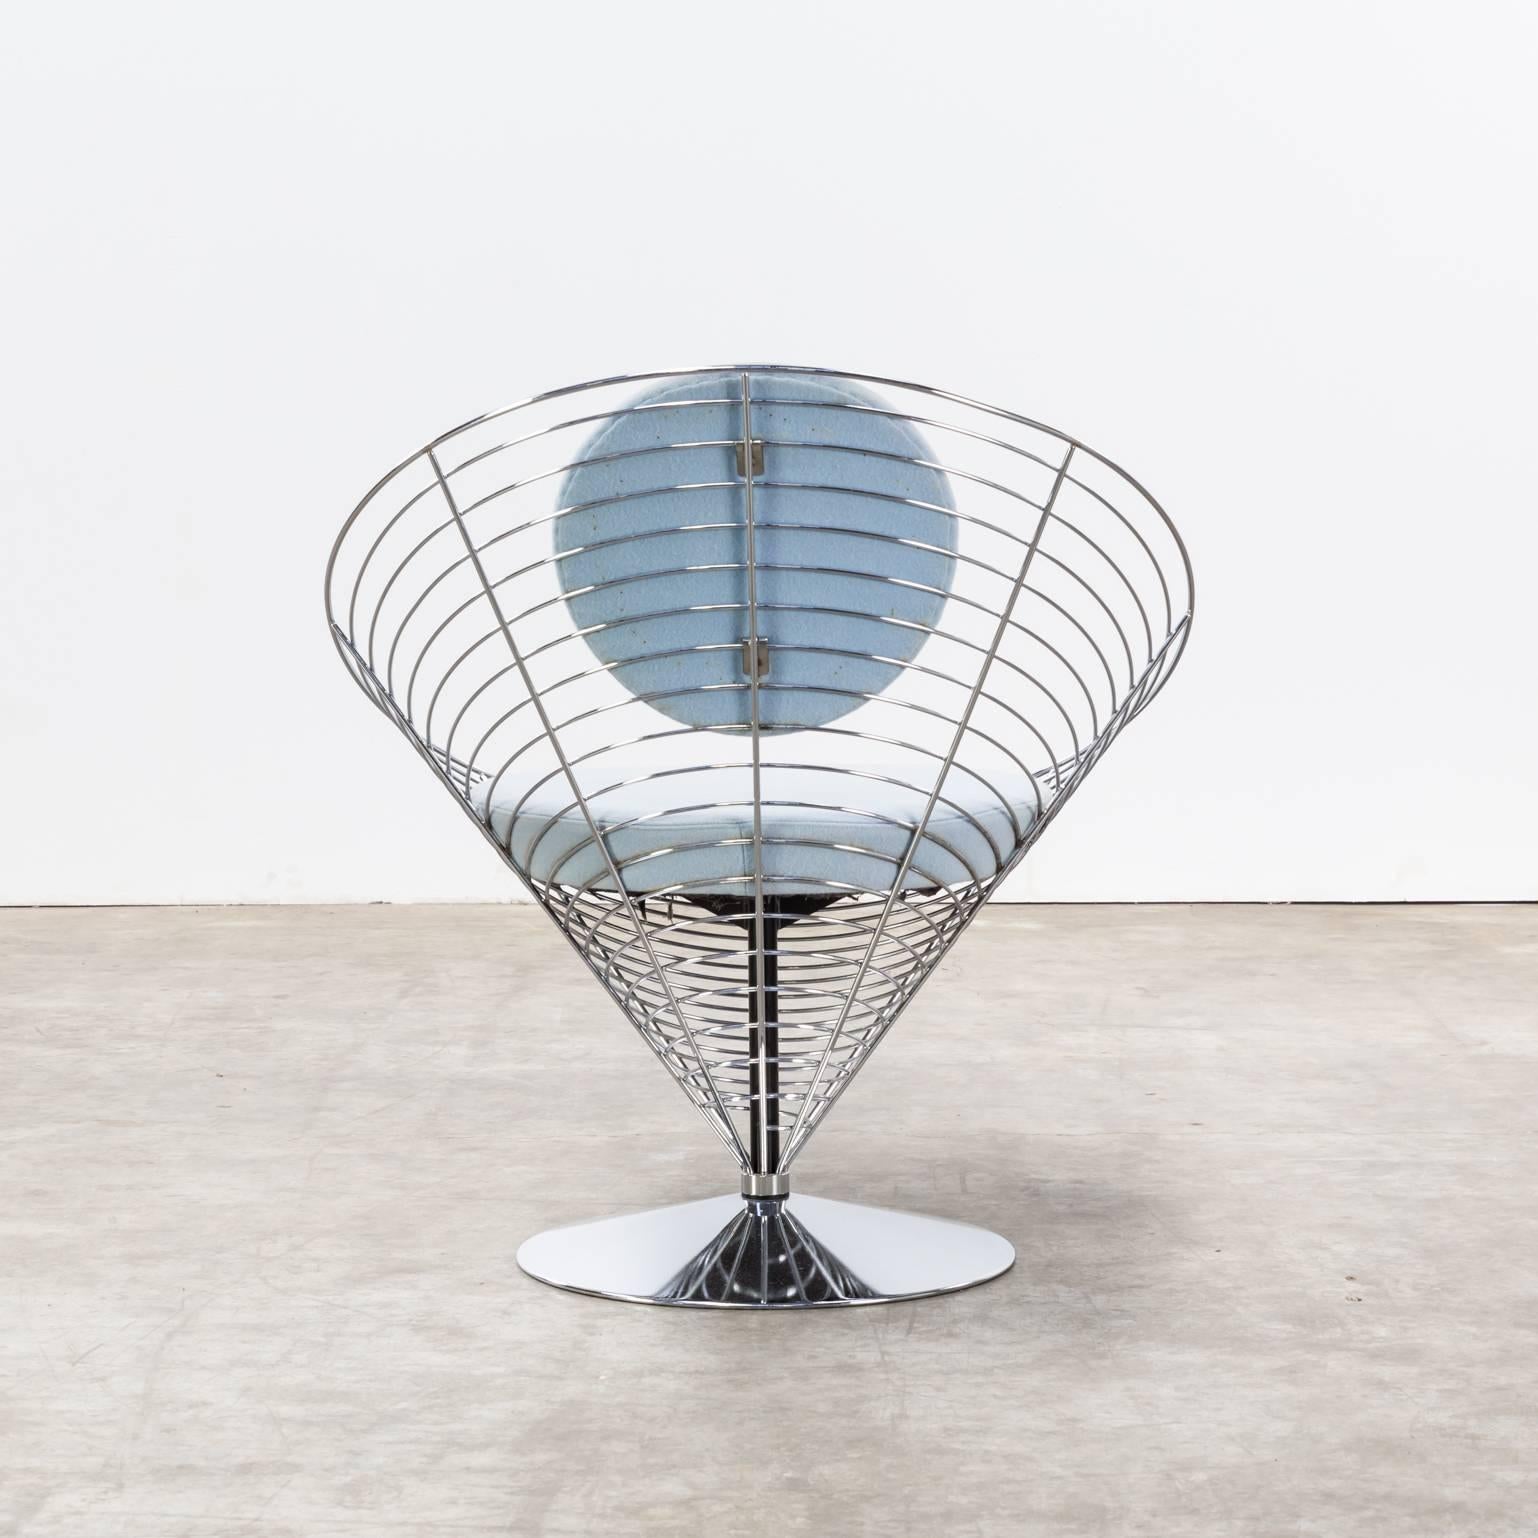 Late 20th Century 1980s Verner Panton Cone Chair for Fritz Hansen For Sale